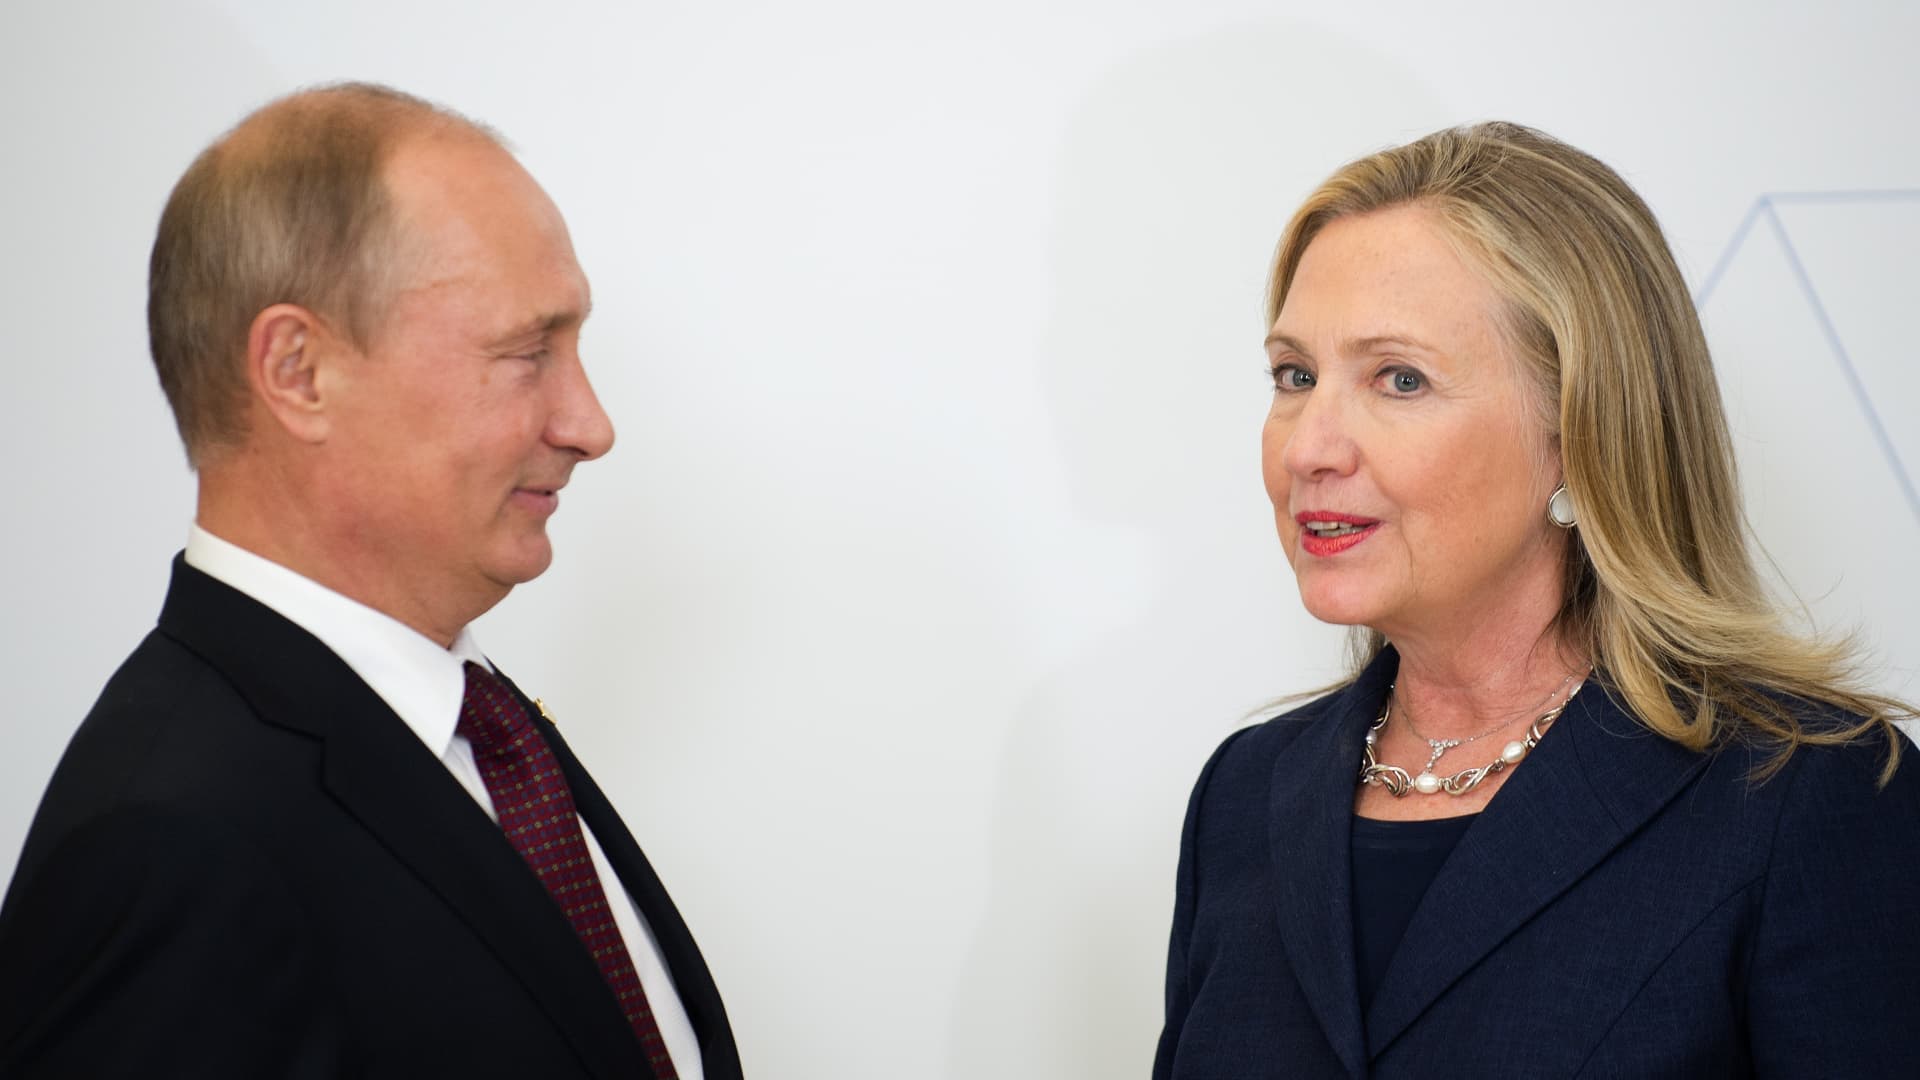 US Secretary of State Hillary Clintontalks with Russian President Vladimir Putin during the arrival ceremony for the Asian-Pacific Economic CooperationSummit in Vladivostok, Russia, September 8, 2012.